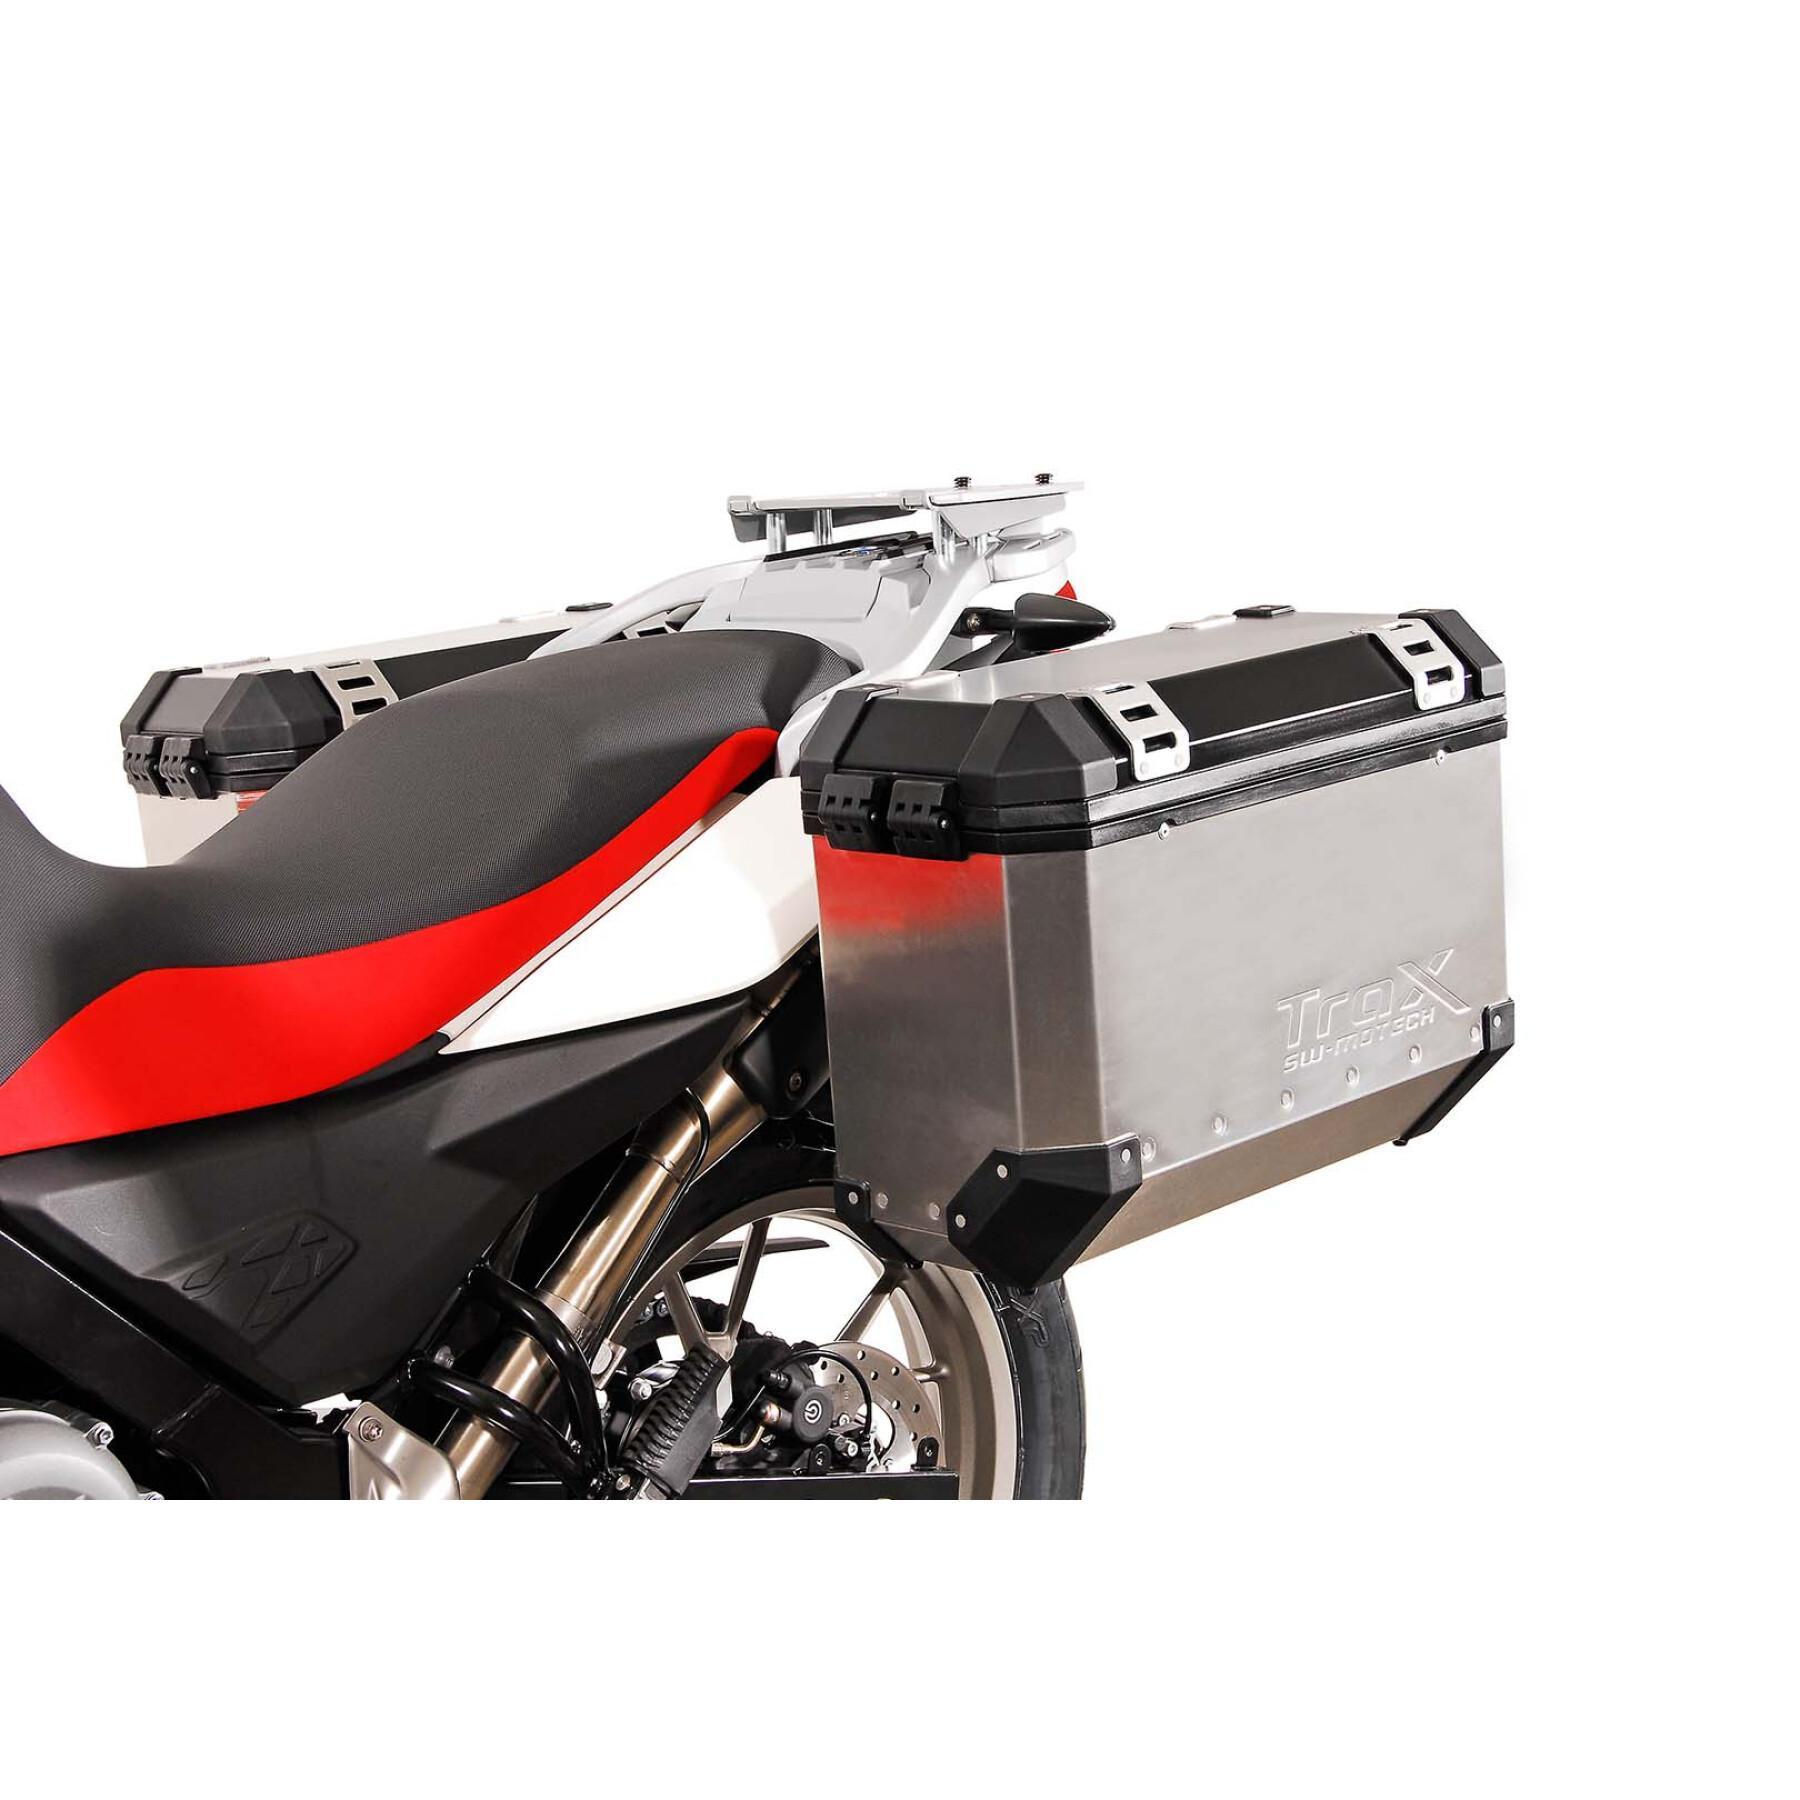 Motorcycle side case support Sw-Motech Evo. Bmw F 650 Gs (-07), G 650 Gs (11-15)